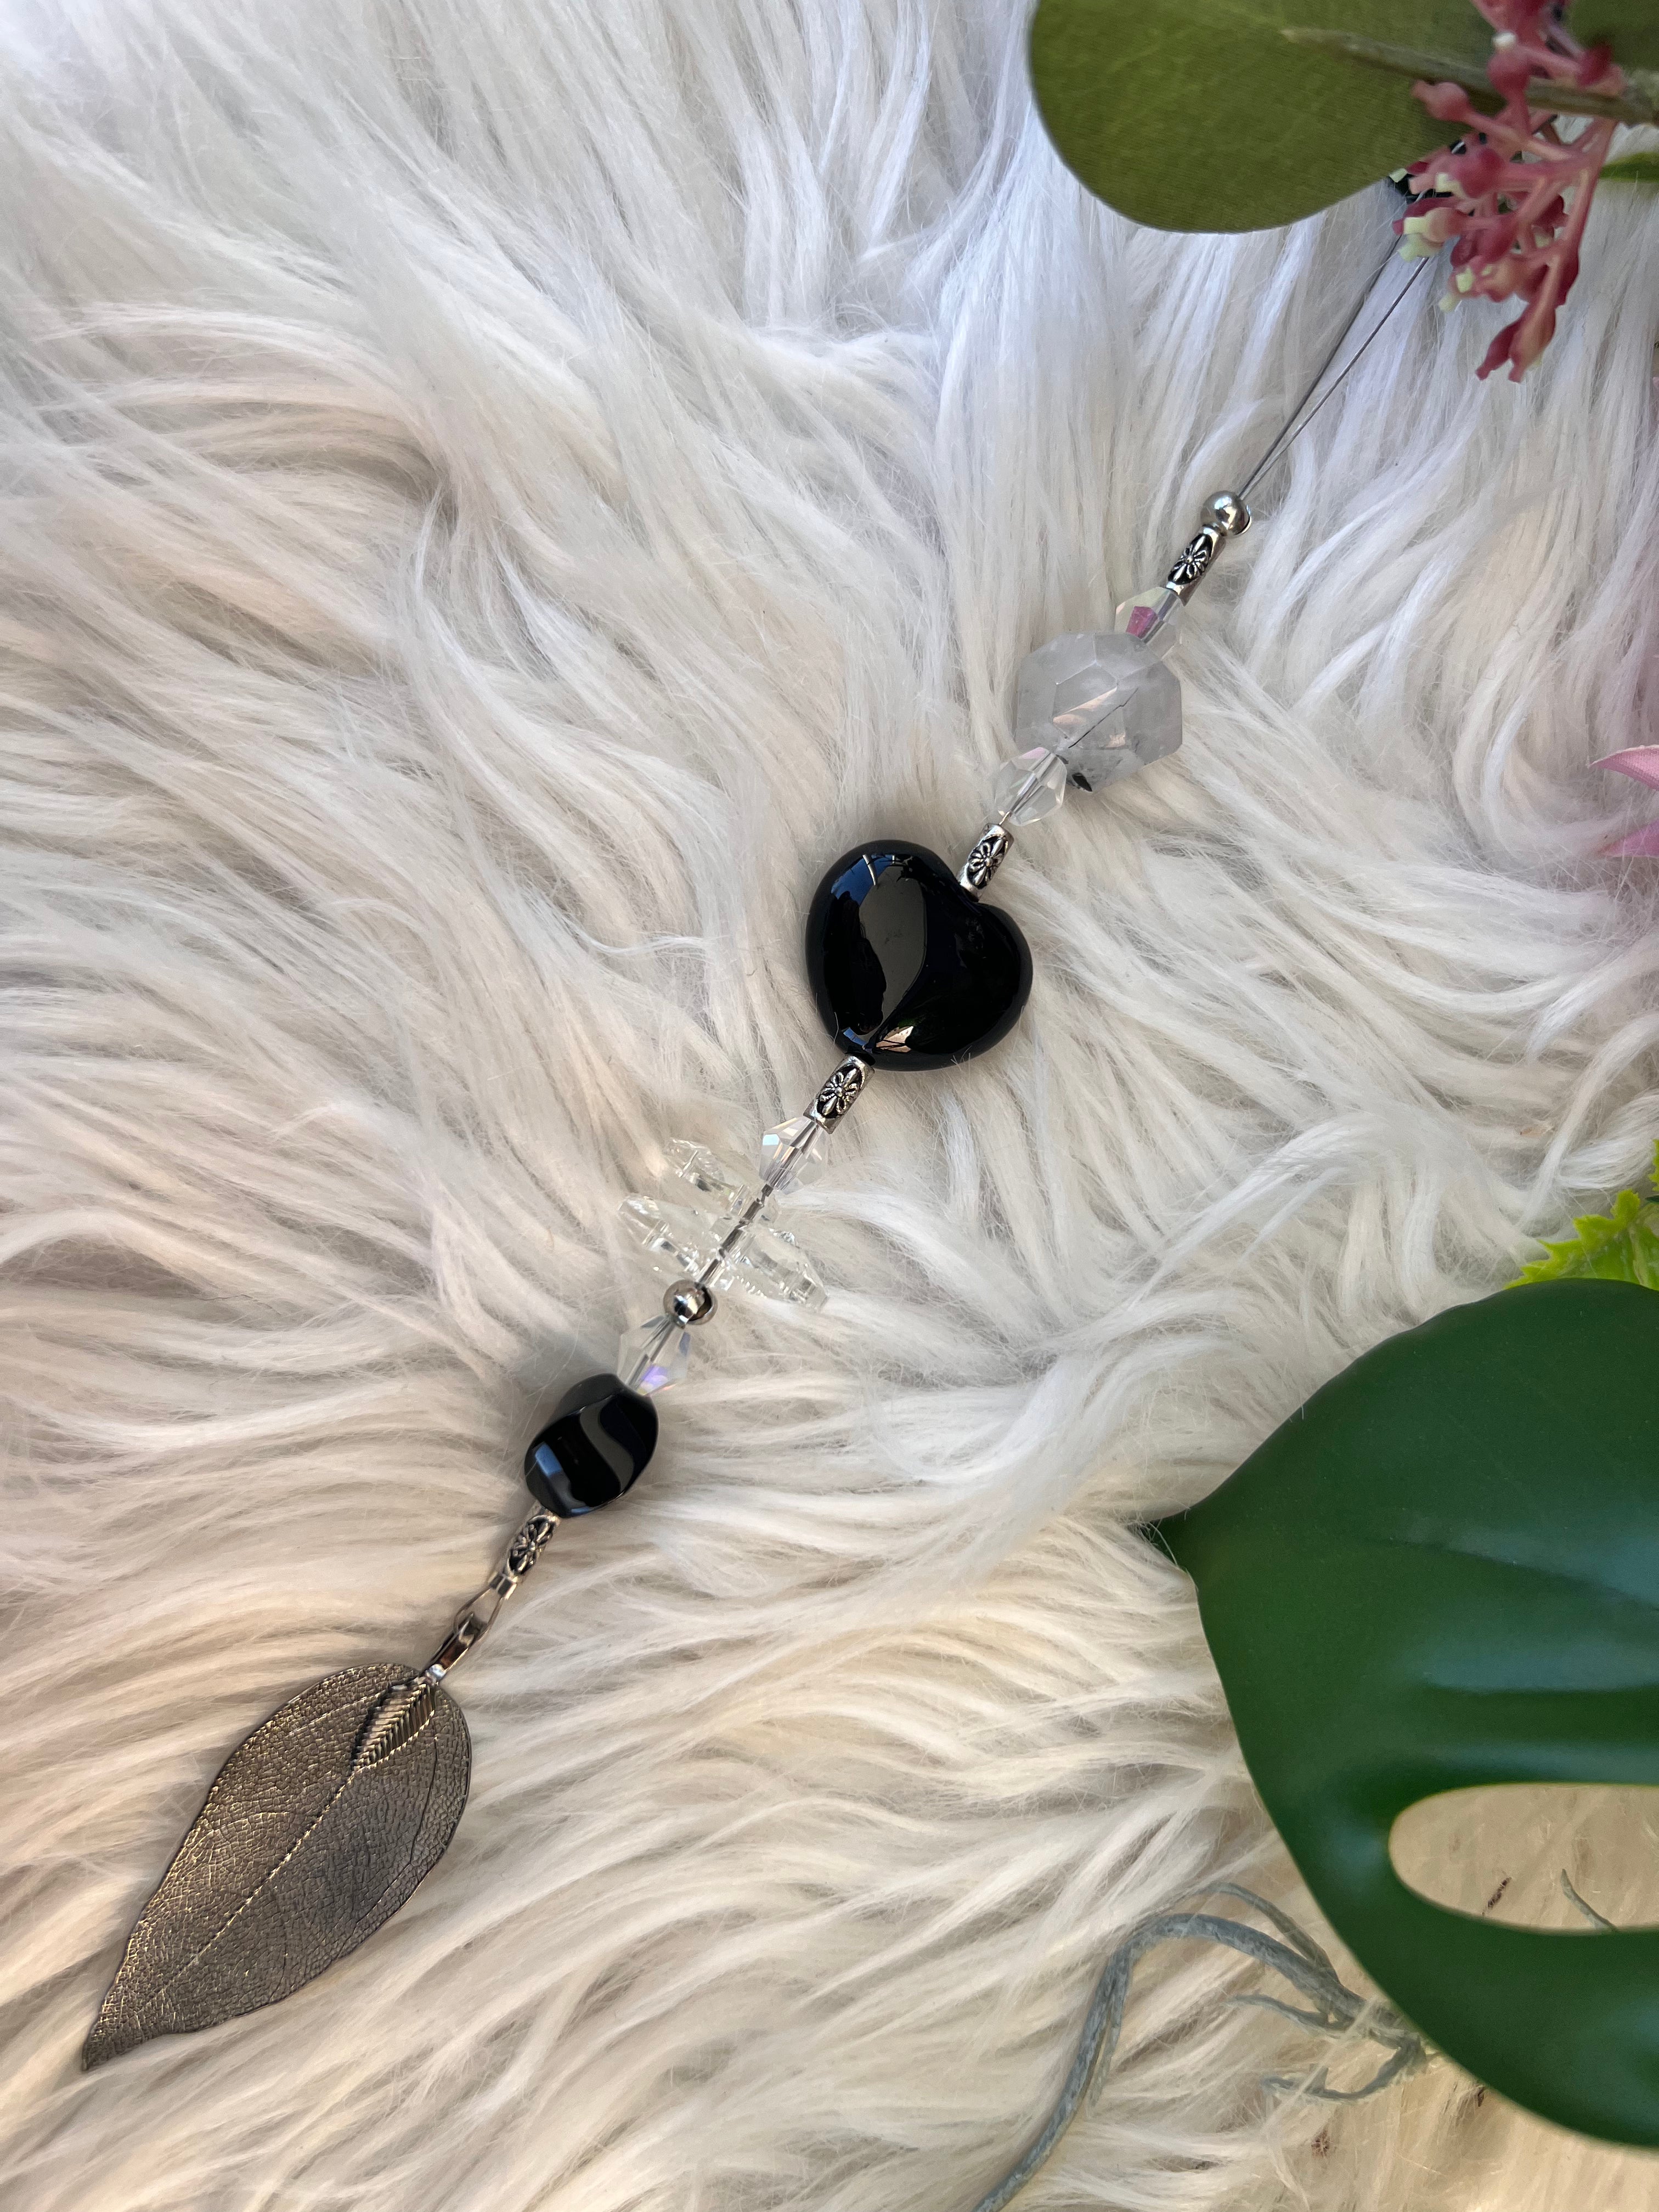 Crystal Sun Catcher Love Hanger - Black Obsidian - Muse Crystals & Mystical Gifts